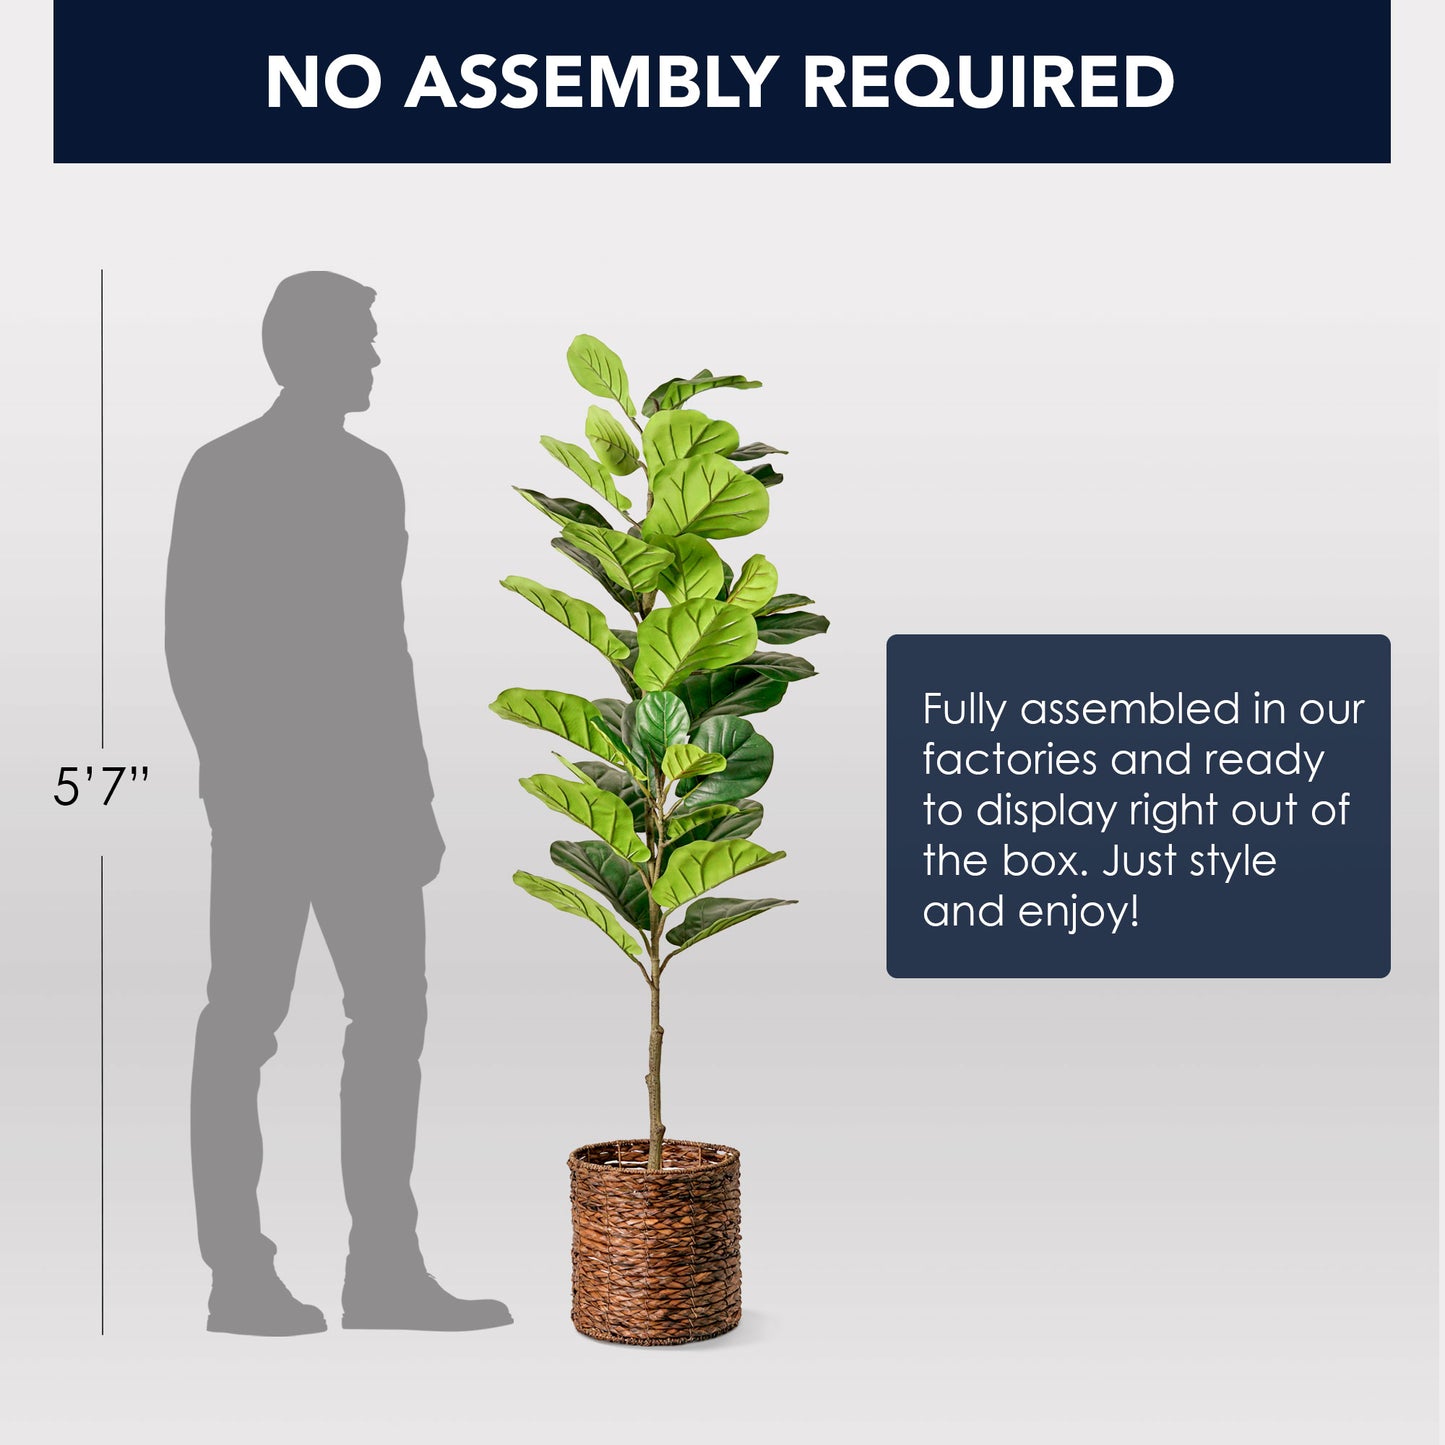 Artificial Fiddle Fig Tree in Water Hyacinth Woven Basket - 60" - Botanica Home ™